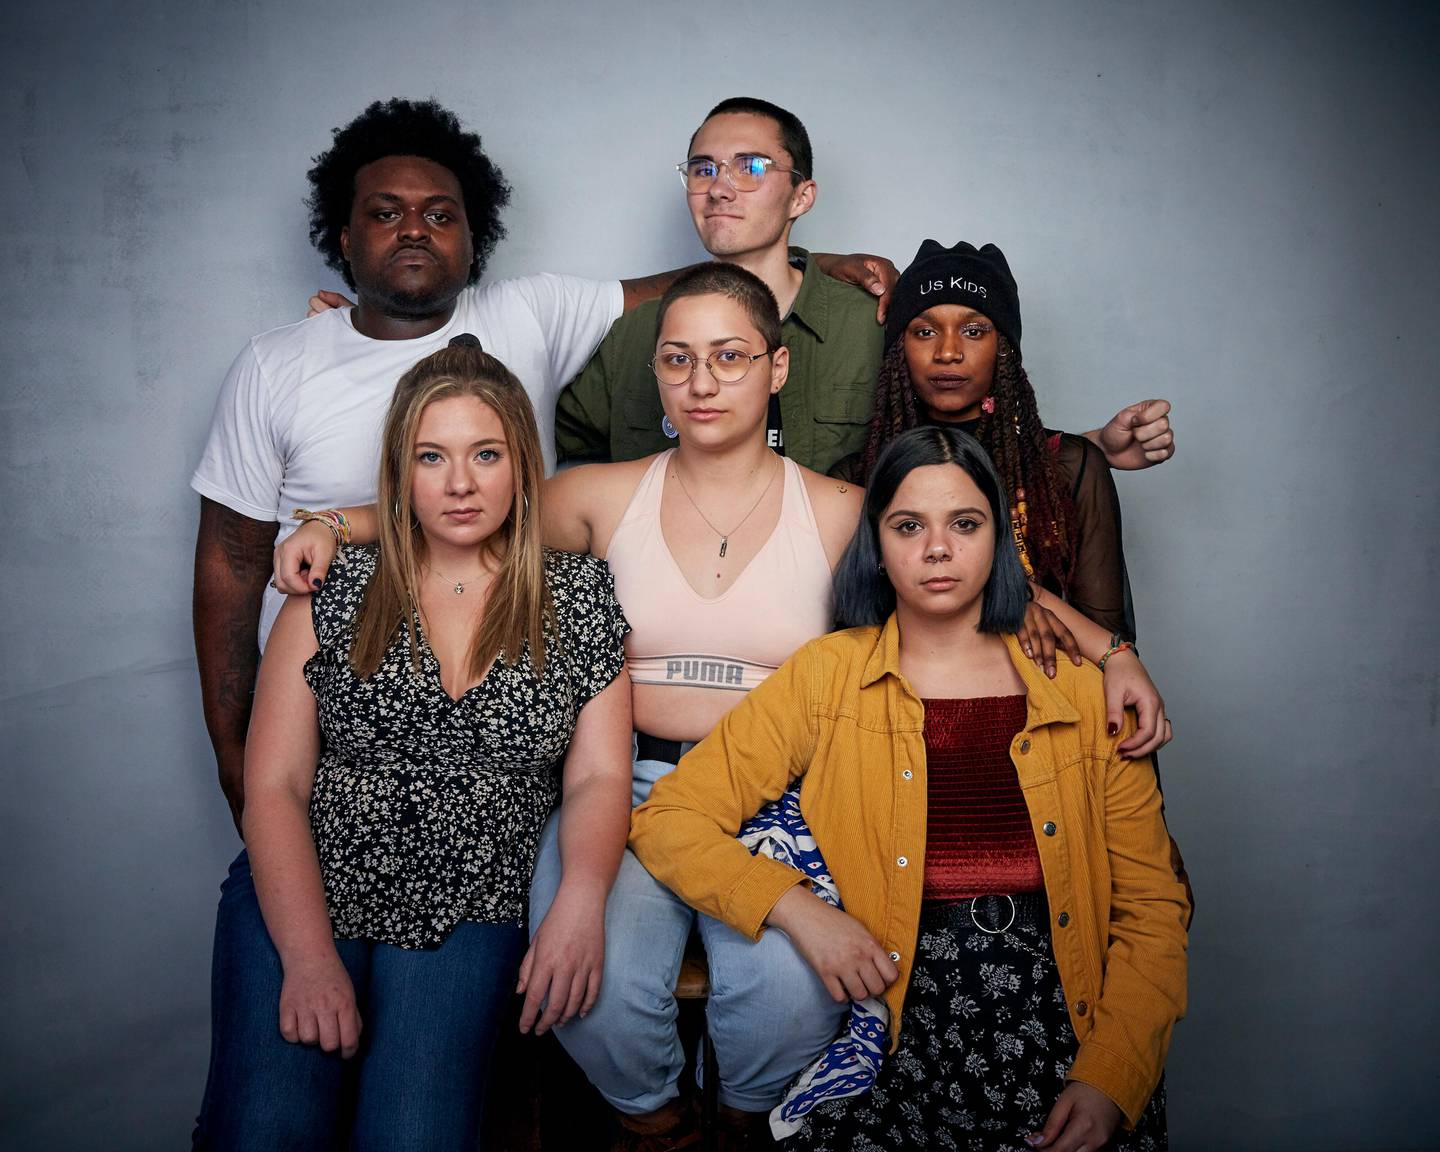 Alex King, from top left, David Hogg, Jackie Corin, from bottom left, Emma Gonzalez, Sam Fuentes, and Bria Smith pose for a portrait to promote the film "Us Kids" at the Music Lodge during the Sundance Film Festival on Saturday, Jan. 25, 2020, in Park City, Utah. (Photo by Taylor Jewell/Invision/AP)